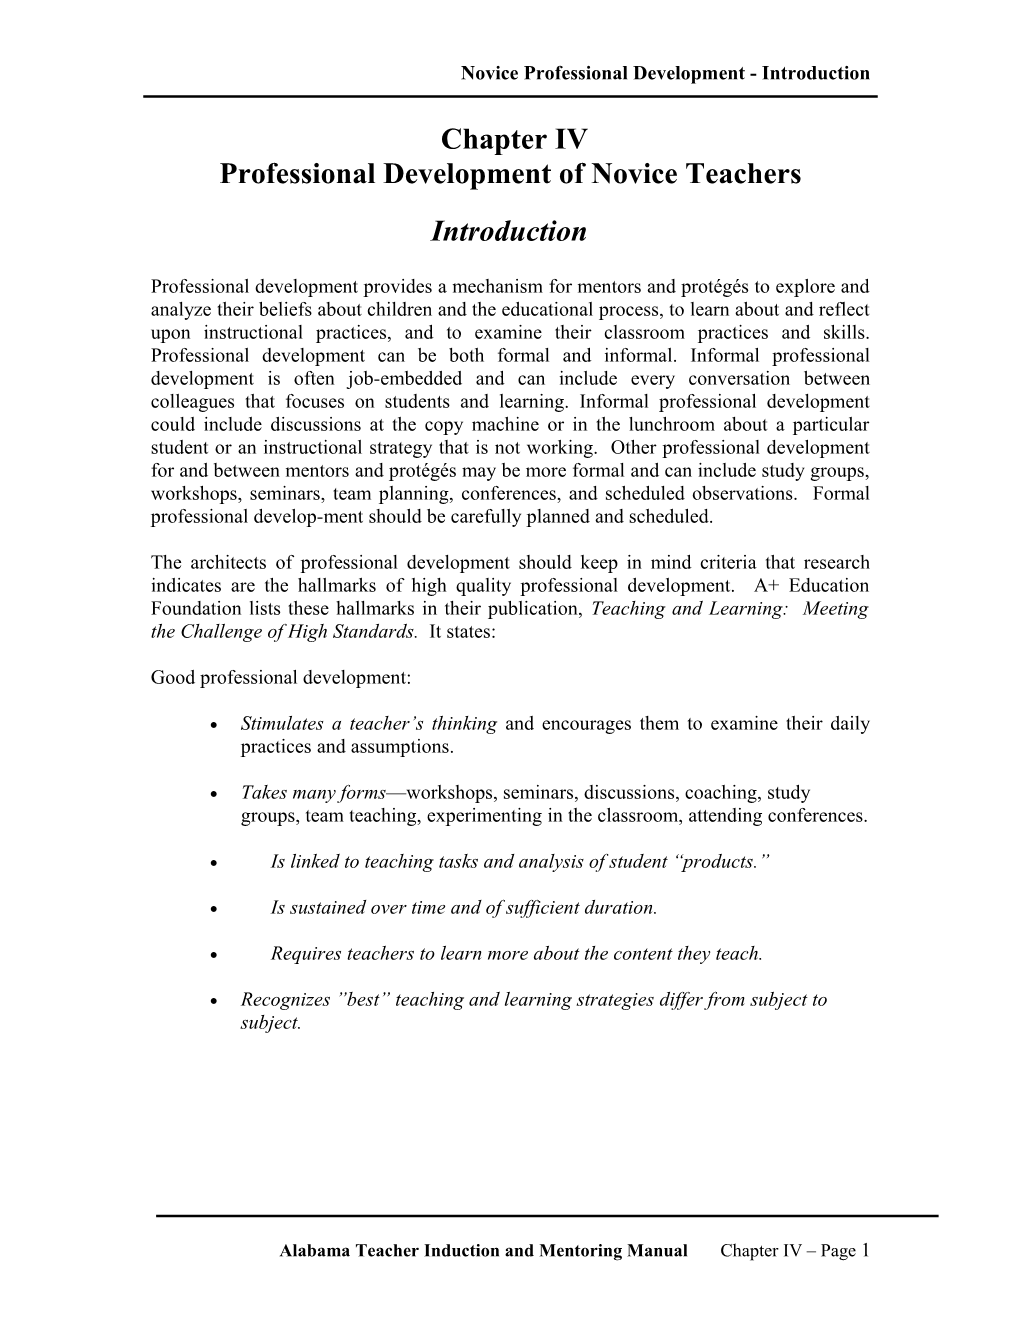 What Are the Responsibilities for Professional Development